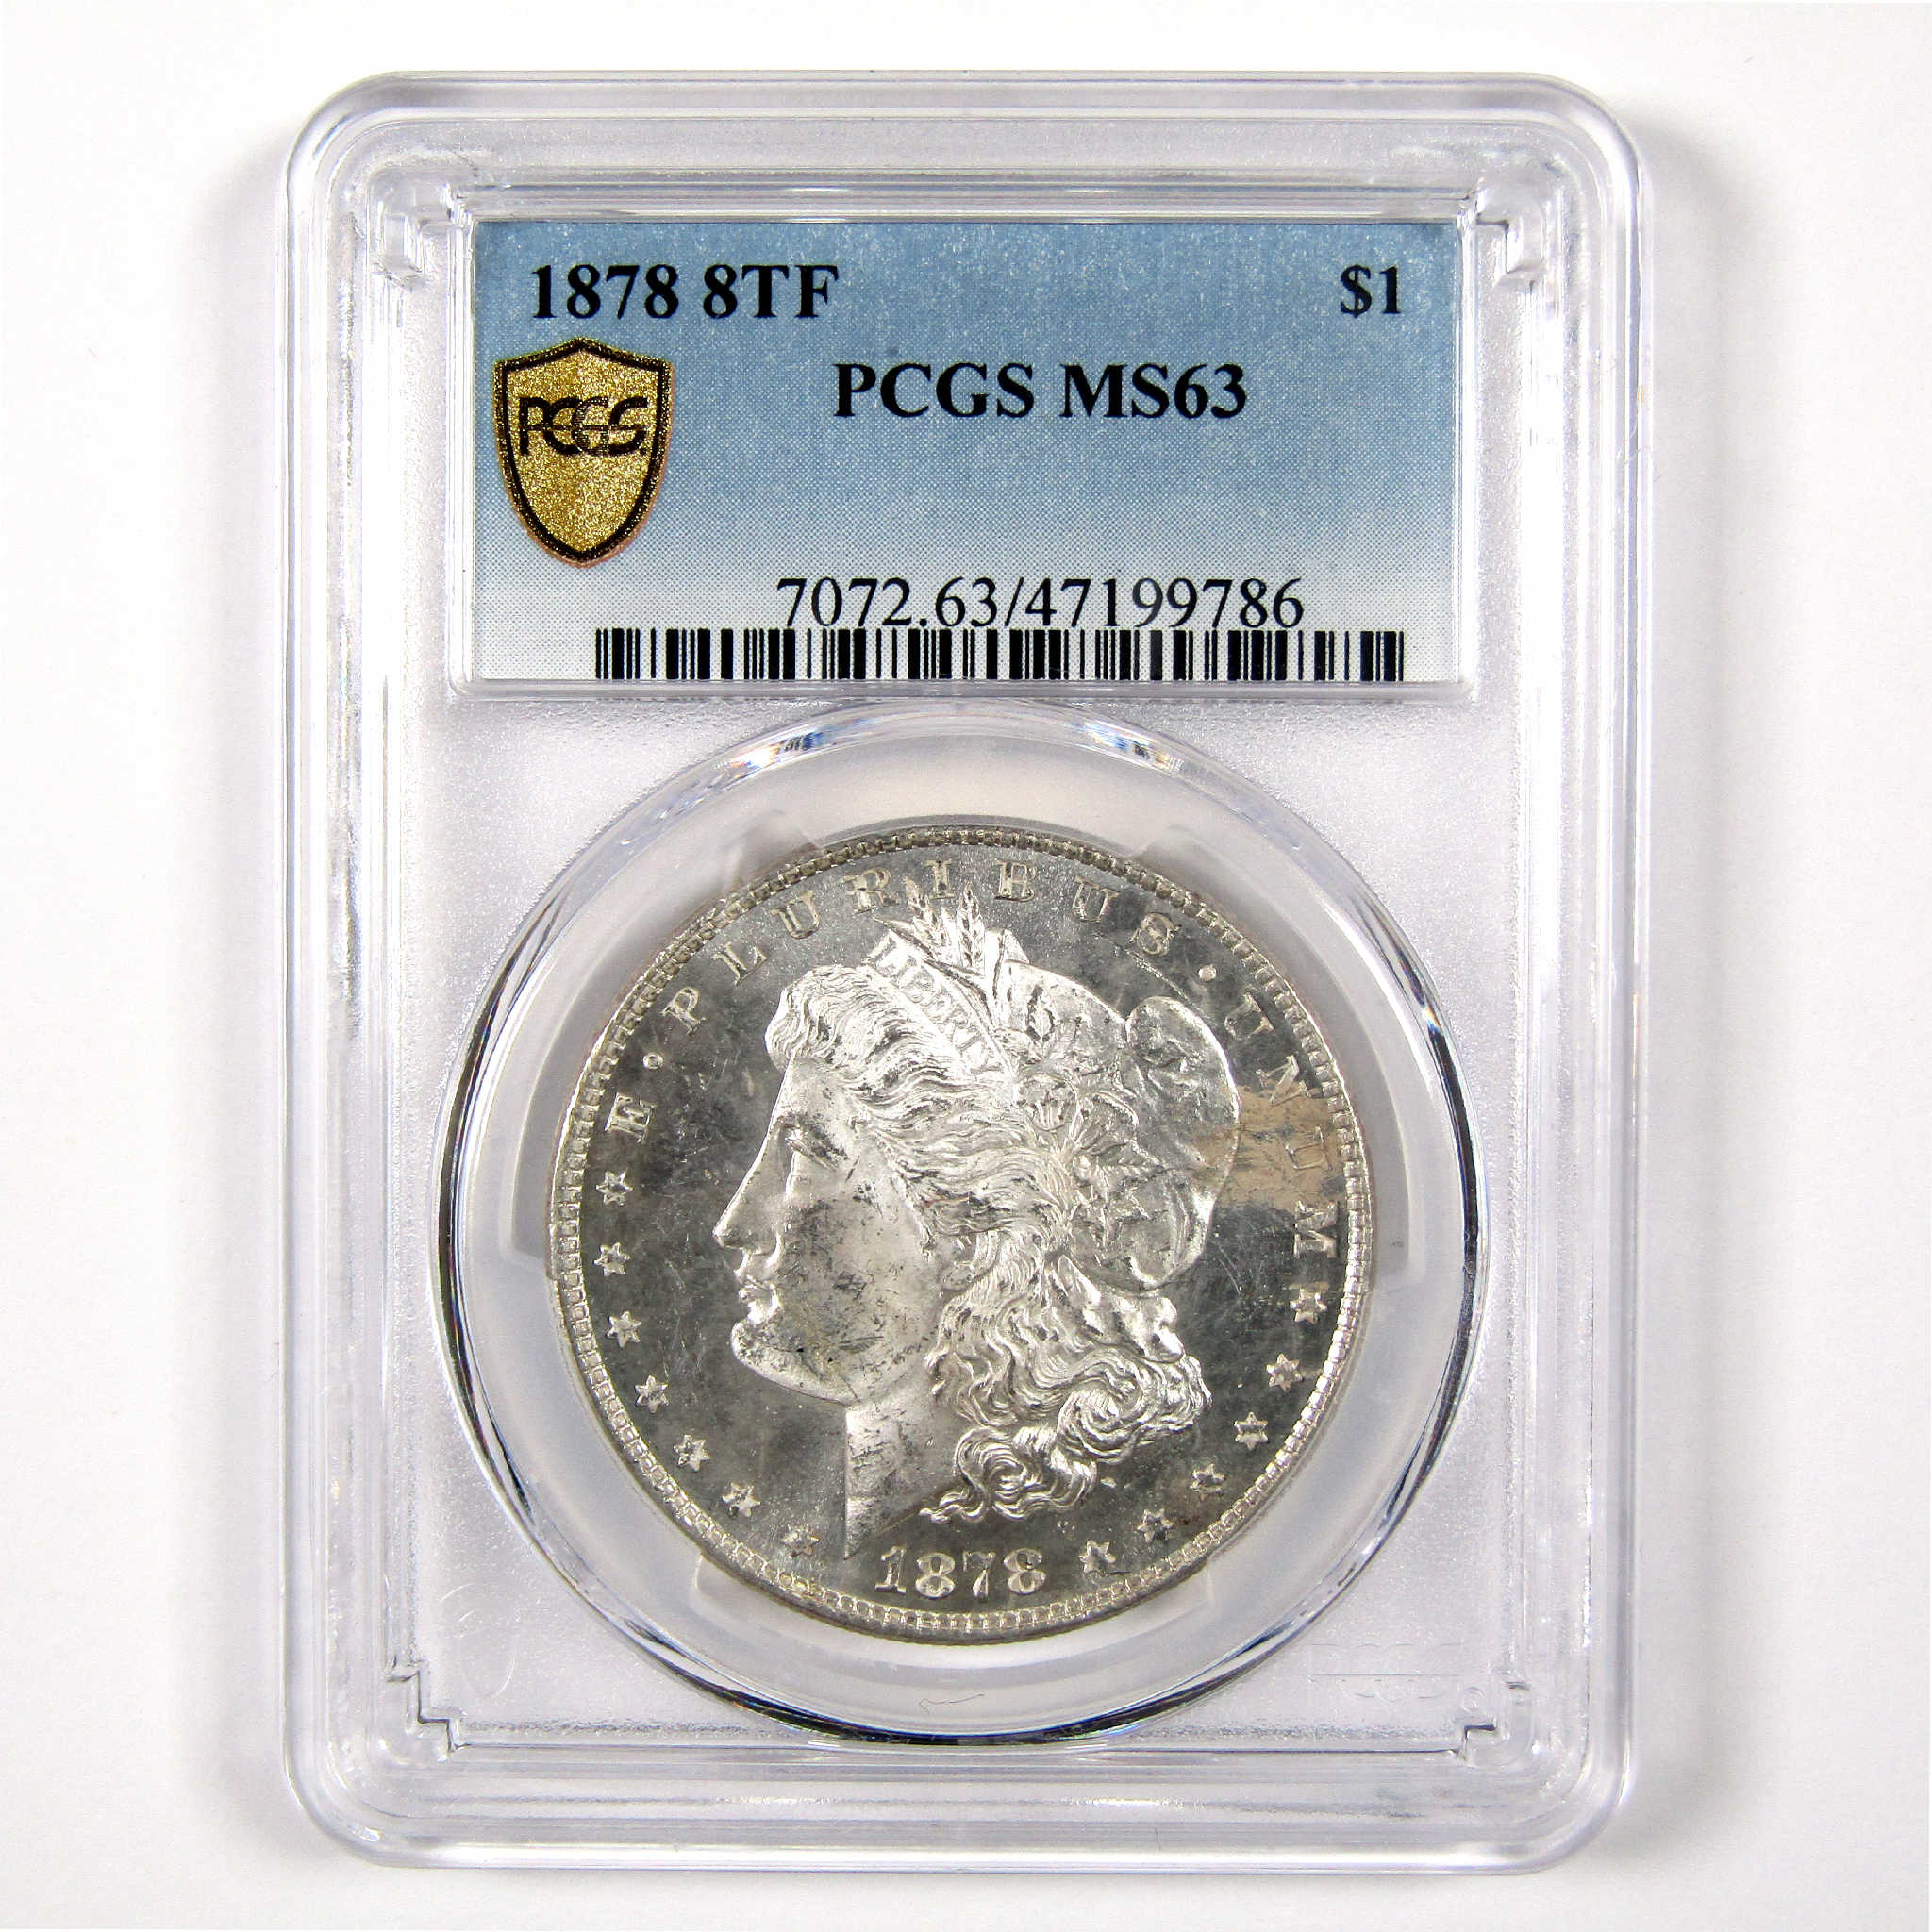 1878 8TF Morgan Dollar MS 63 PCGS Silver $1 Uncirculated SKU:I11333 - Morgan coin - Morgan silver dollar - Morgan silver dollar for sale - Profile Coins &amp; Collectibles